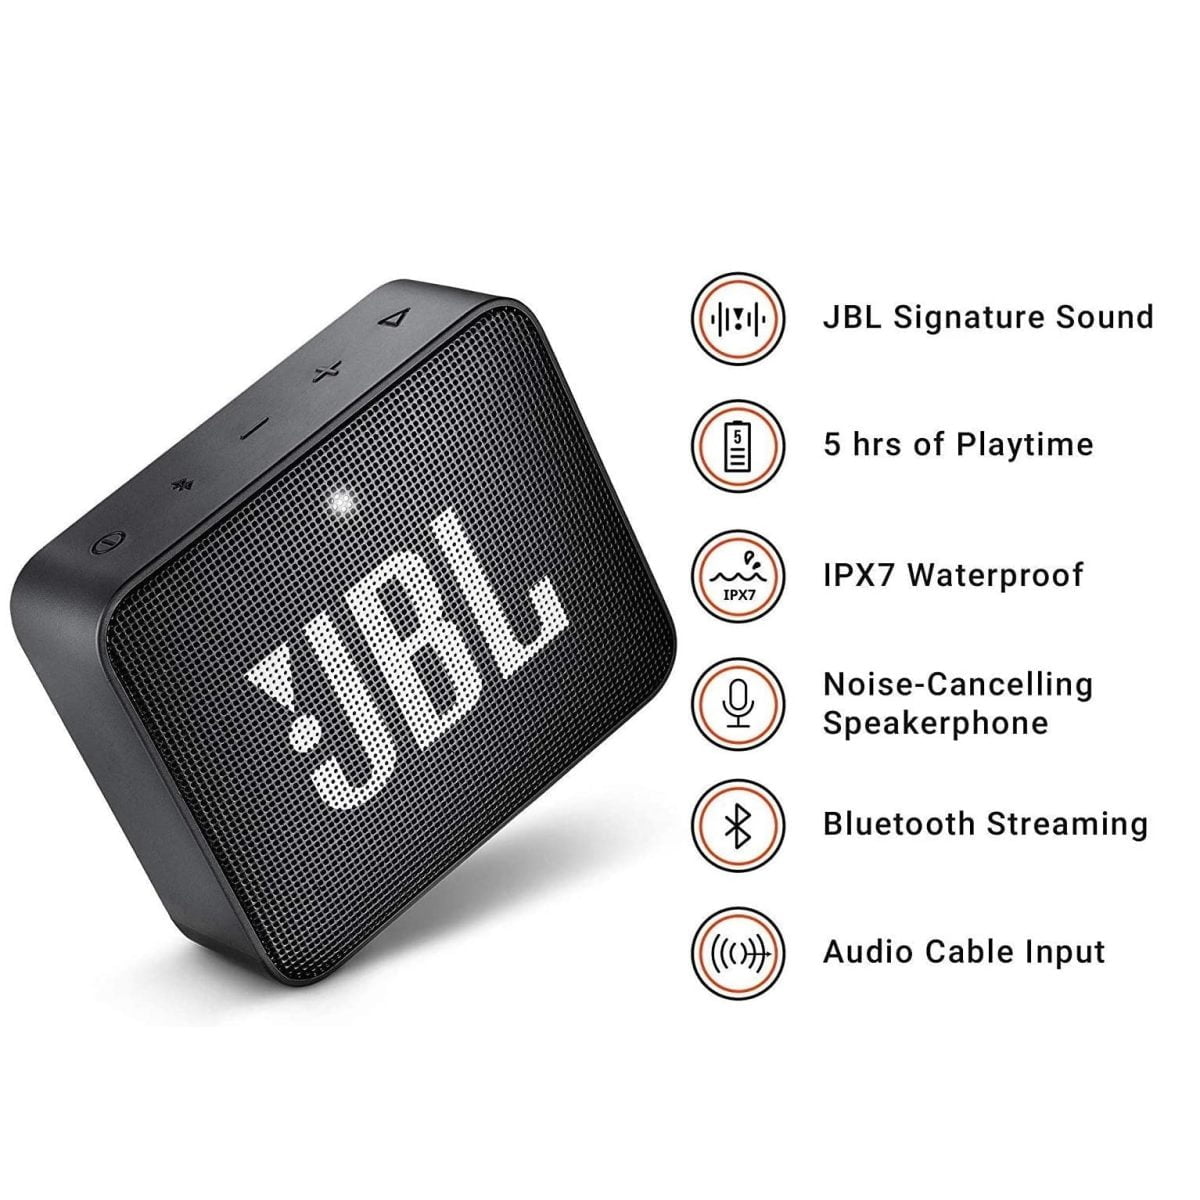 81P9Jbpecel. Ac Sl1500 Jbl &Lt;H1&Gt;Jbl Go 2 Portable Bluetooth Speaker - Black&Lt;/H1&Gt; Https://Youtu.be/9Fgn9Bkal2Q &Lt;P Class=&Quot;Short-Desc&Quot;&Gt;The Jbl Go 2 Is A Full-Featured Waterproof Bluetooth Speaker To Take With You Everywhere. Wirelessly Stream Music Via Bluetooth For Up To 5 Hours Of Continuous Jbl Quality Sound. Making A Splash With Its New Ipx7 Waterproof Design, Go 2 Gives Music Lovers The Opportunity To Bring Their Speaker Poolside, Or To The Beach. Go 2 Also Offers Crystal Clear Phone Call Experience With Its Built-In Noise-Cancelling Speakerphone. Crafted In A Compact Design With 12 Eye-Catching Colors To Choose From, Go 2 Instantly Raises Your Style Profile To All-New Levels.&Lt;/P&Gt; Jbl Speaker Jbl Go 2 Portable Bluetooth Speaker